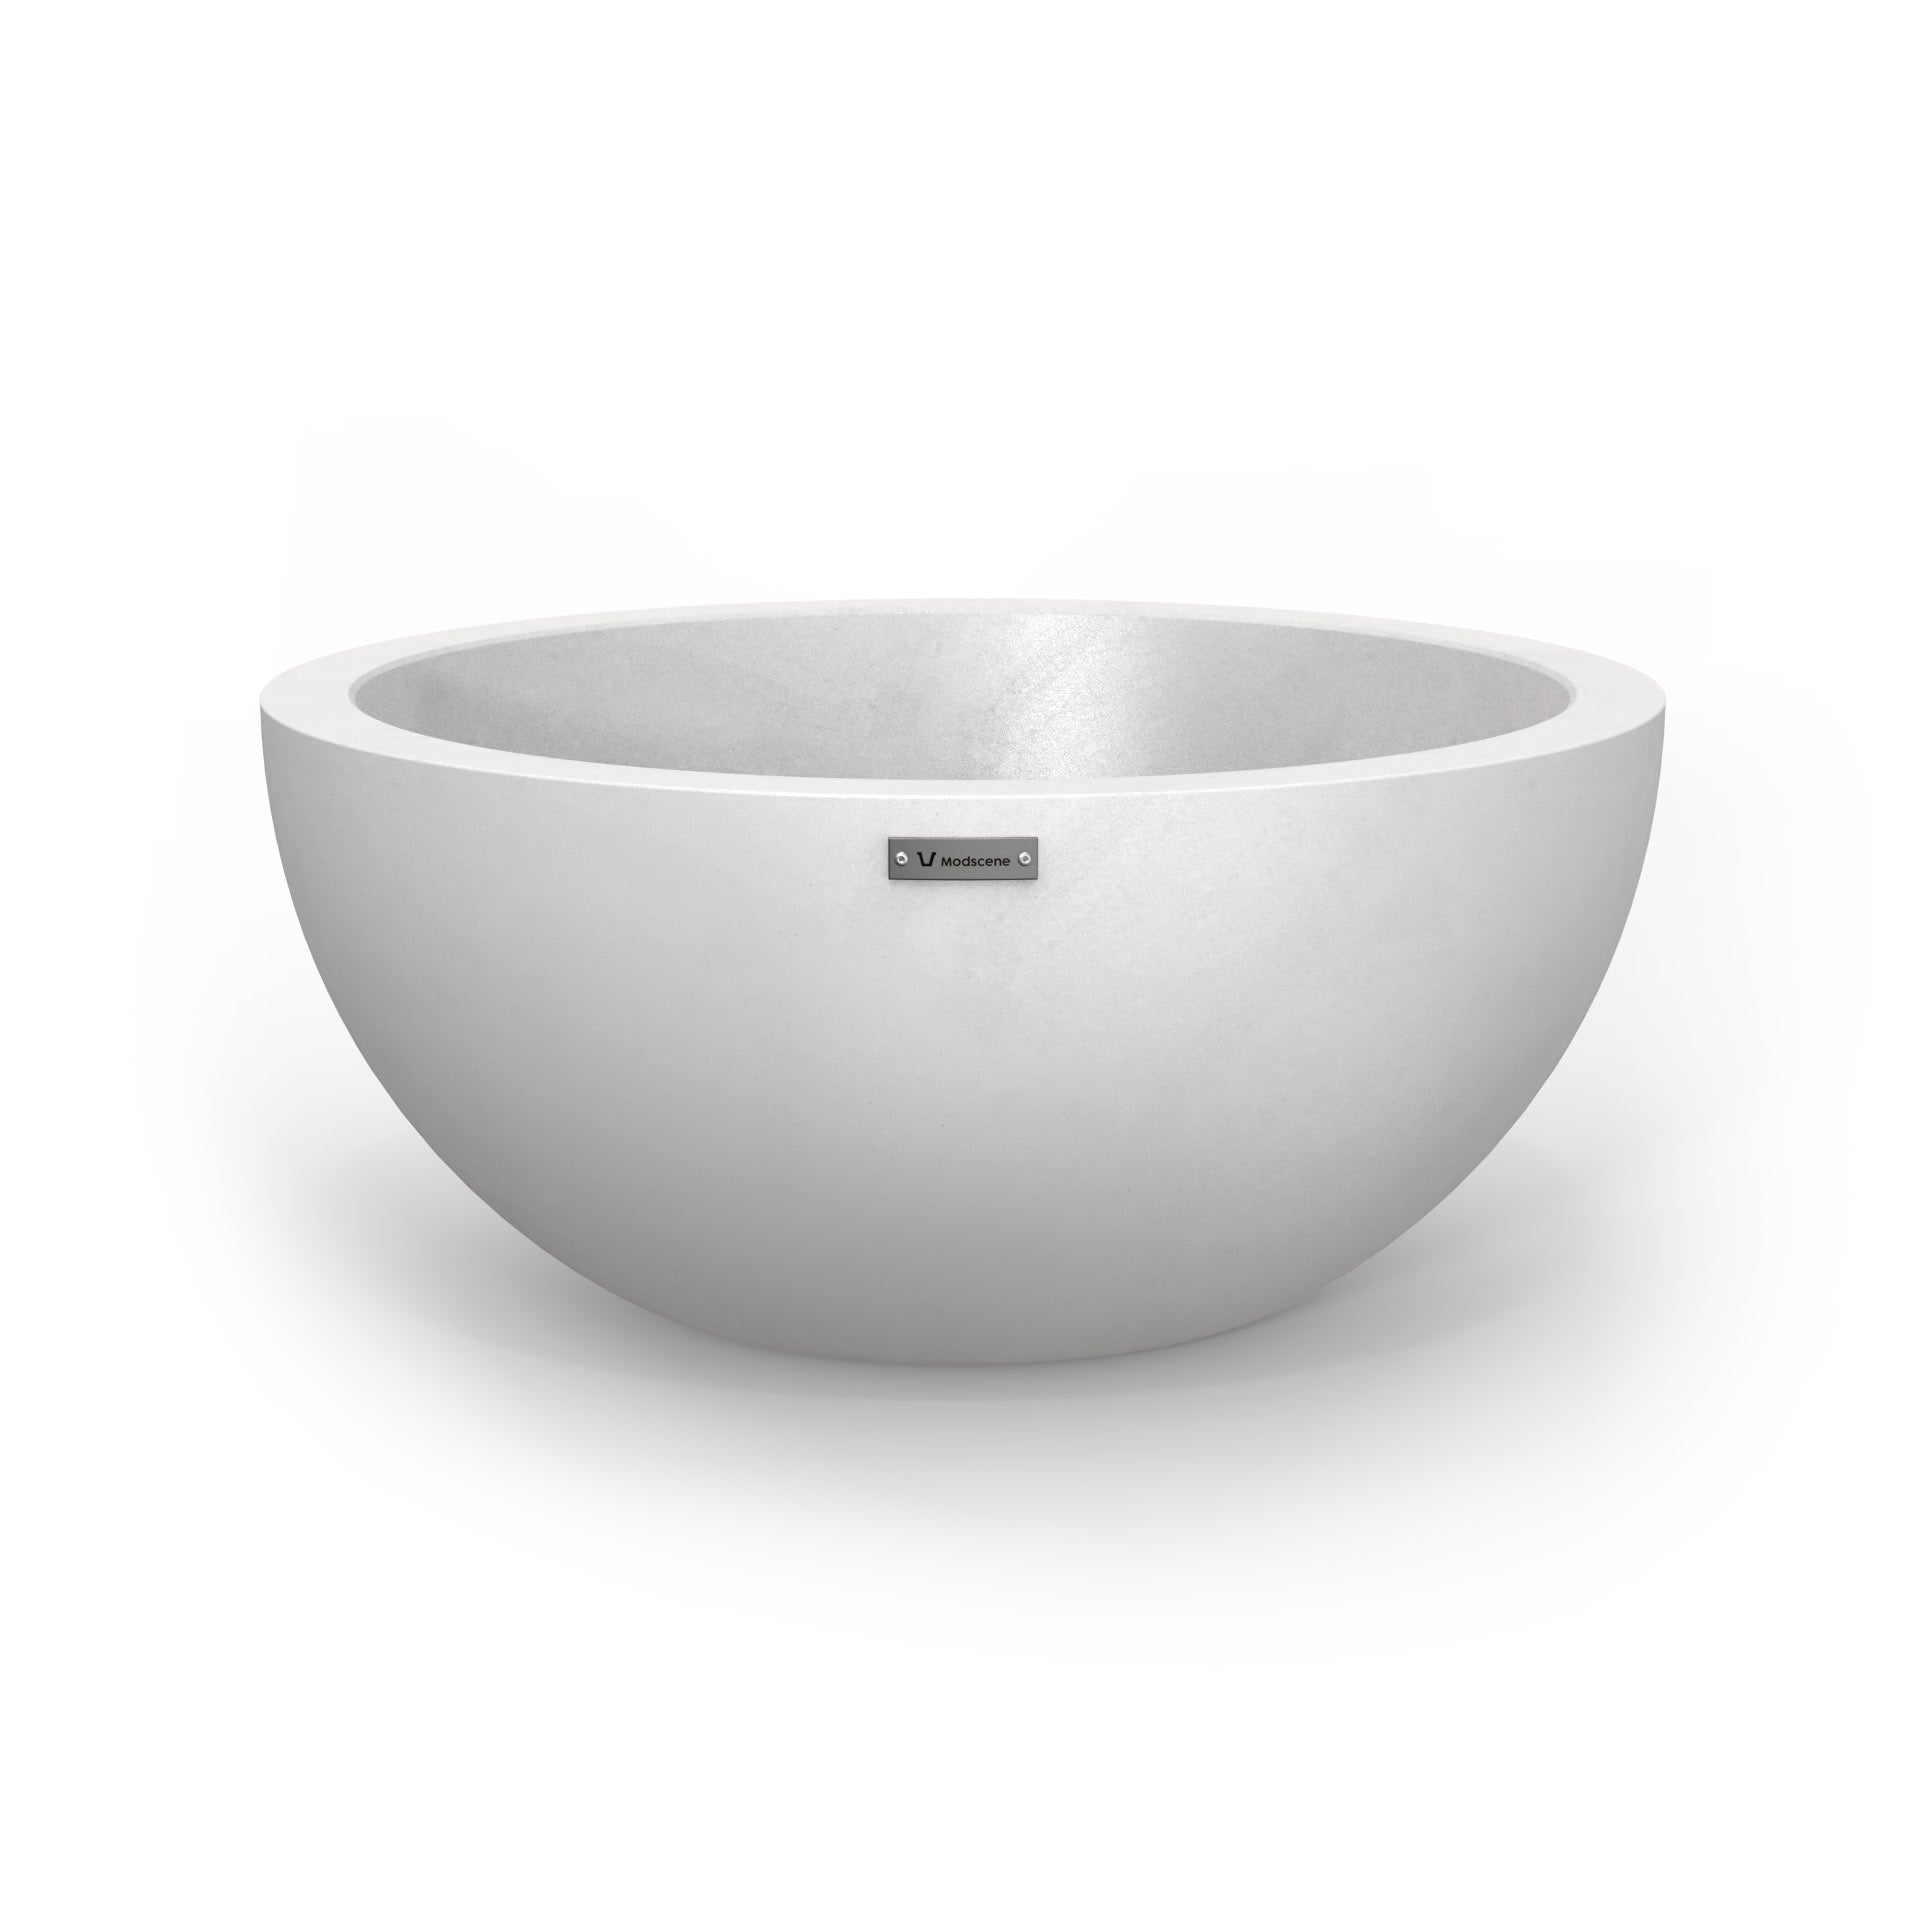 A large planter bowl in matte white made by Modscene.